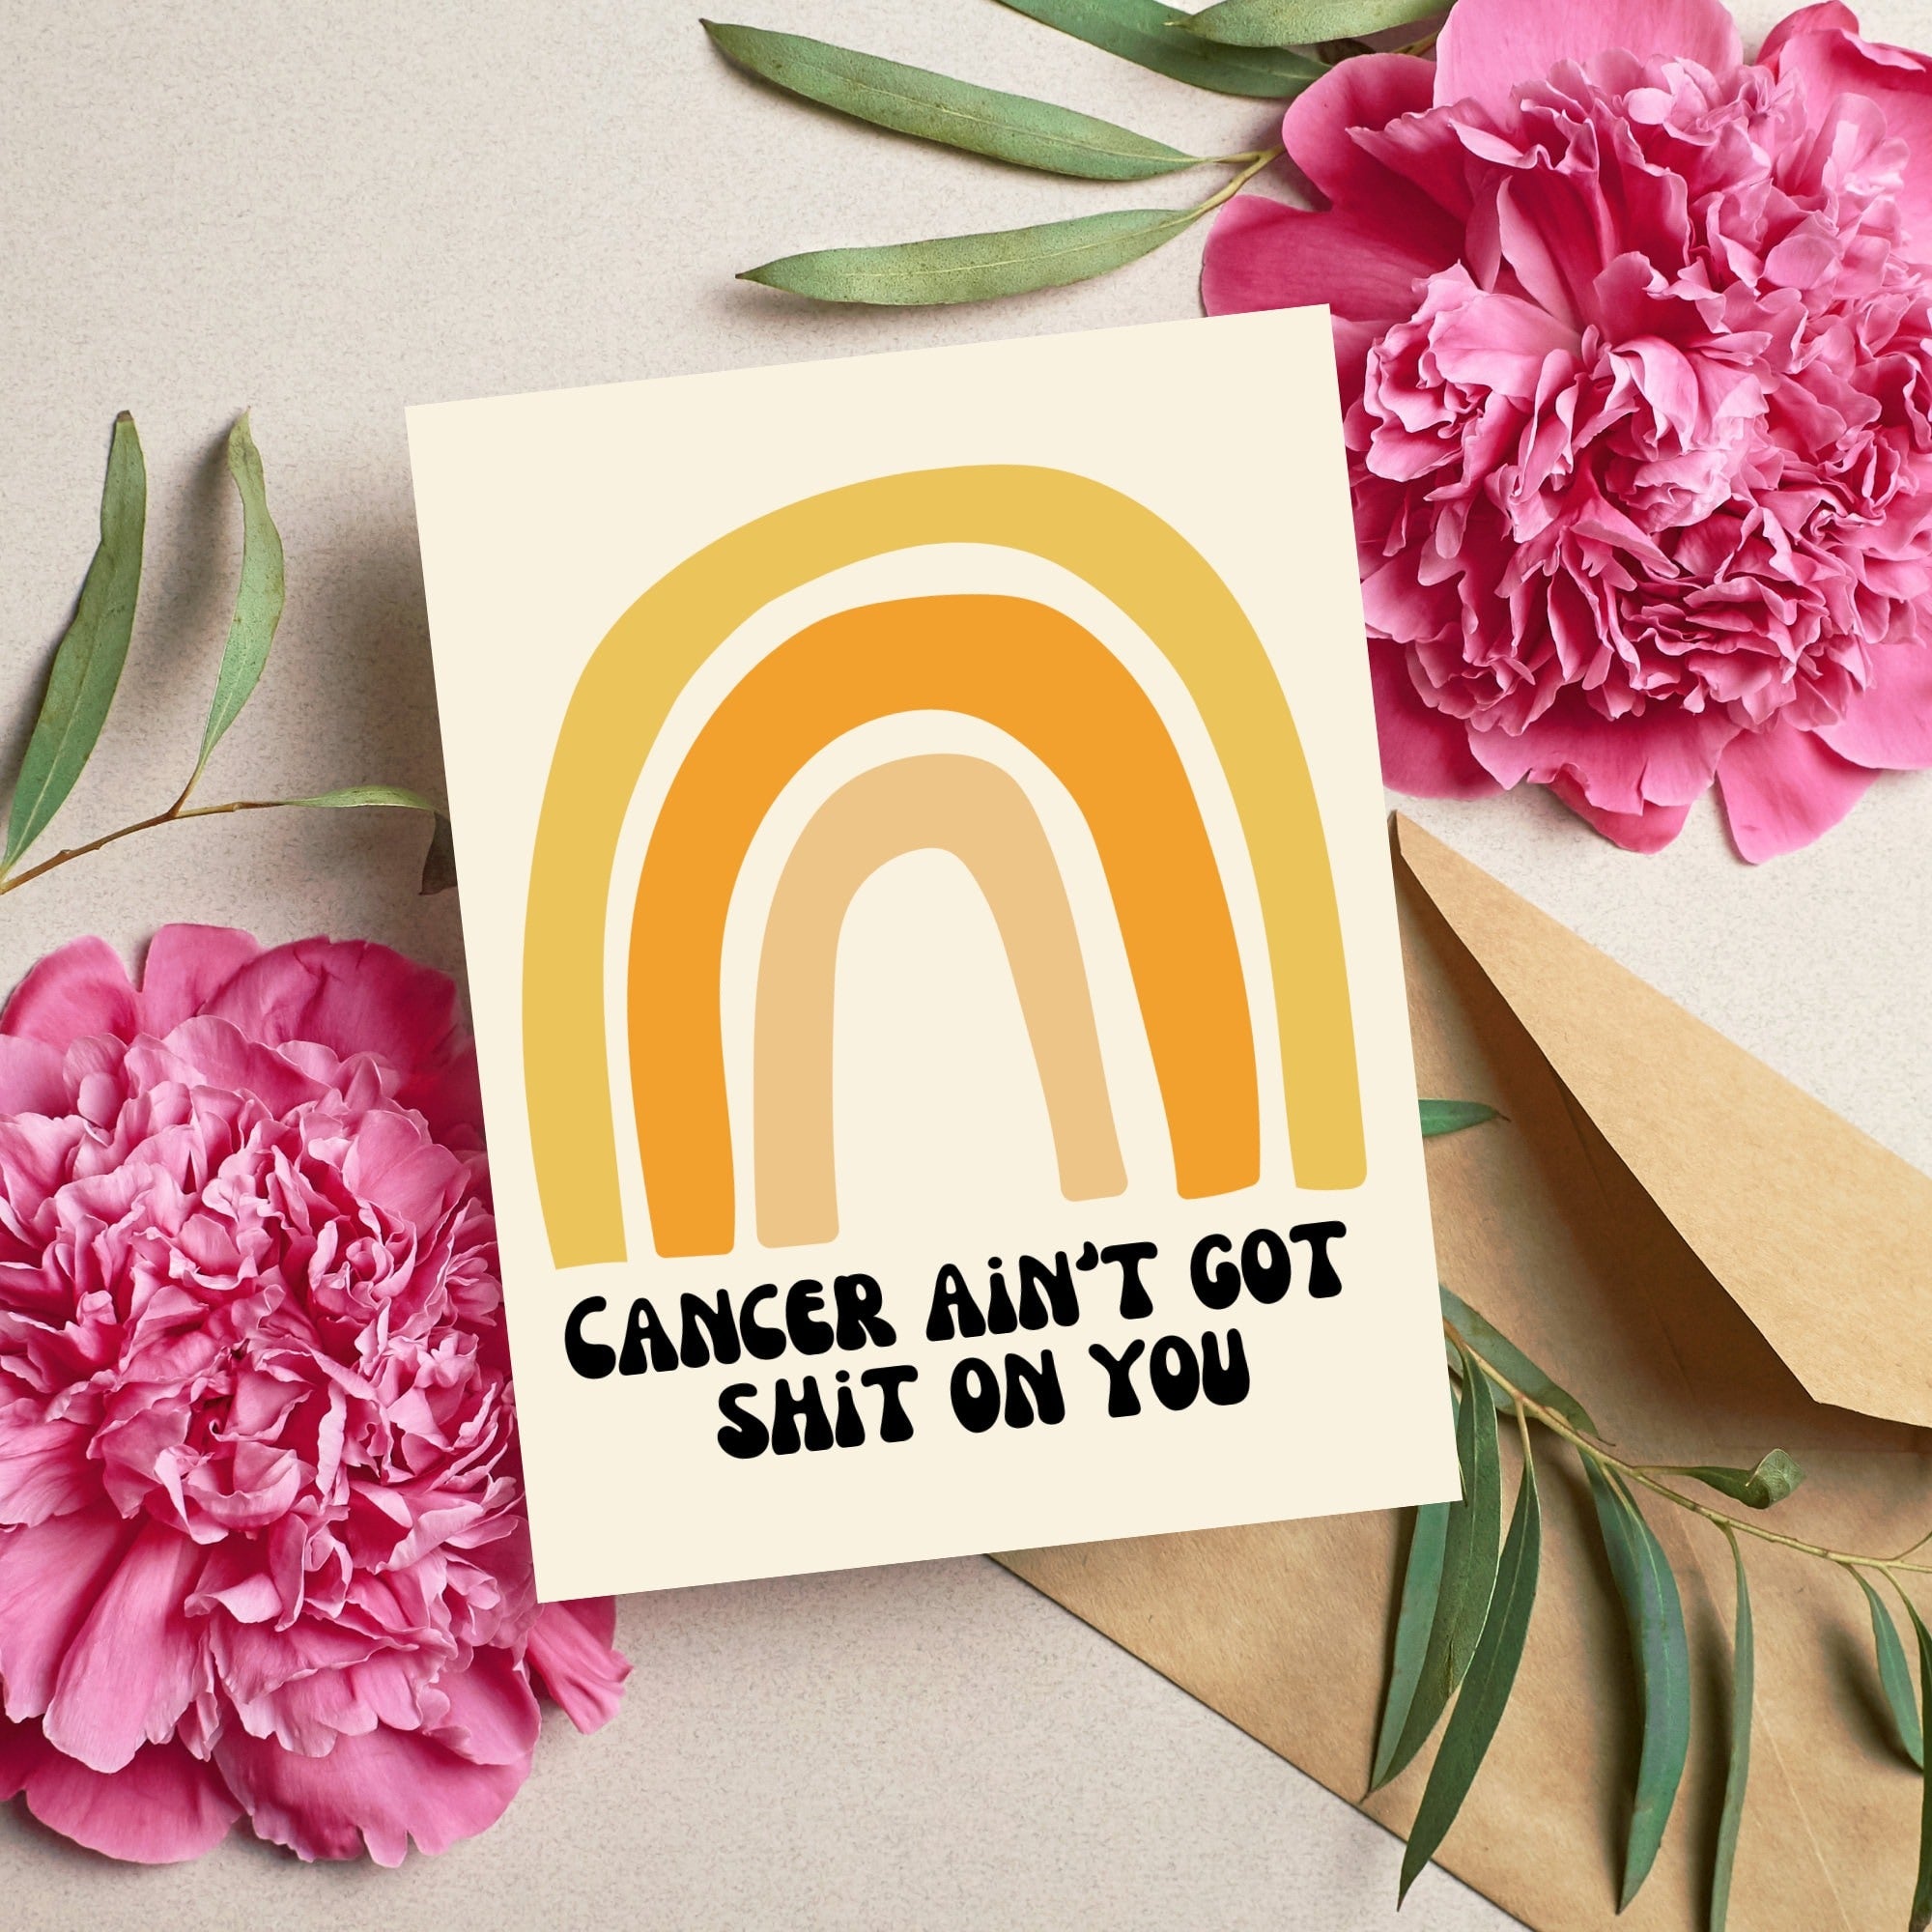 Cancer Ain't Got Shit on You Card